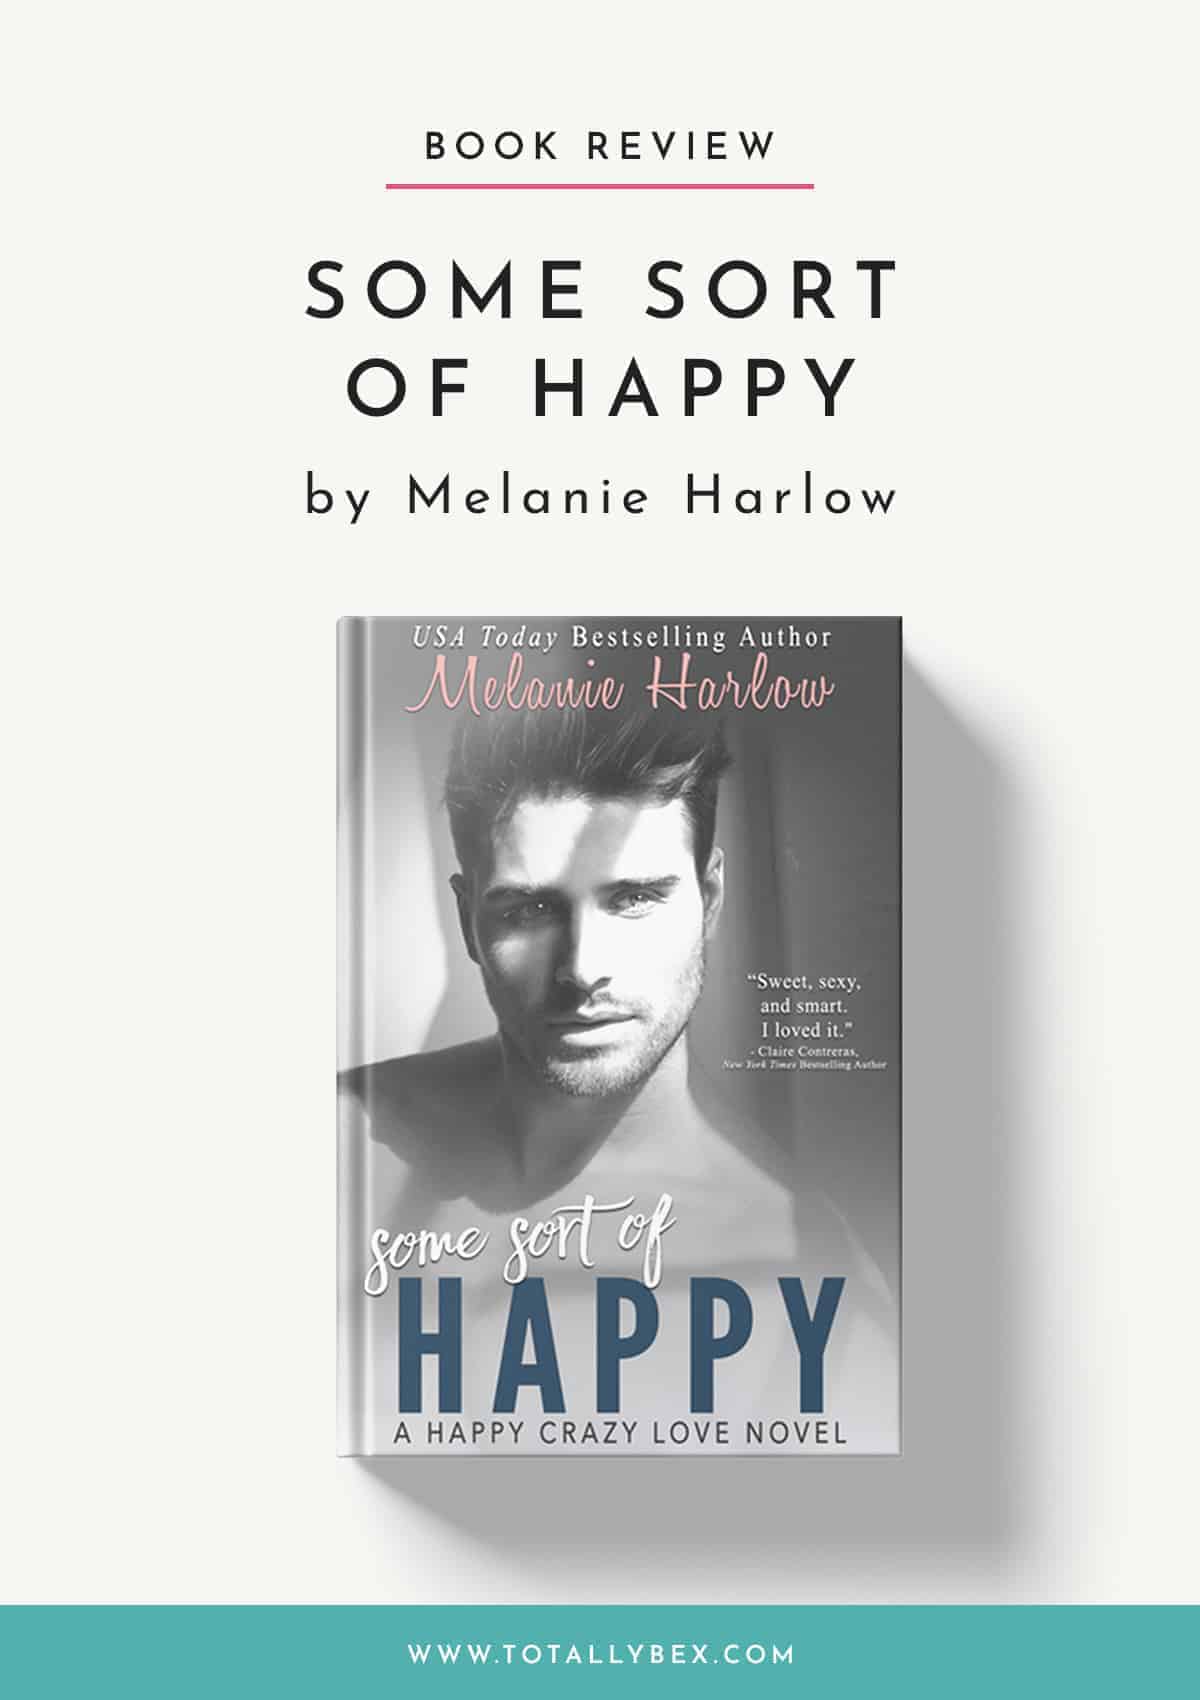 Some Sort of Happy by Melanie Harlow-Book Review